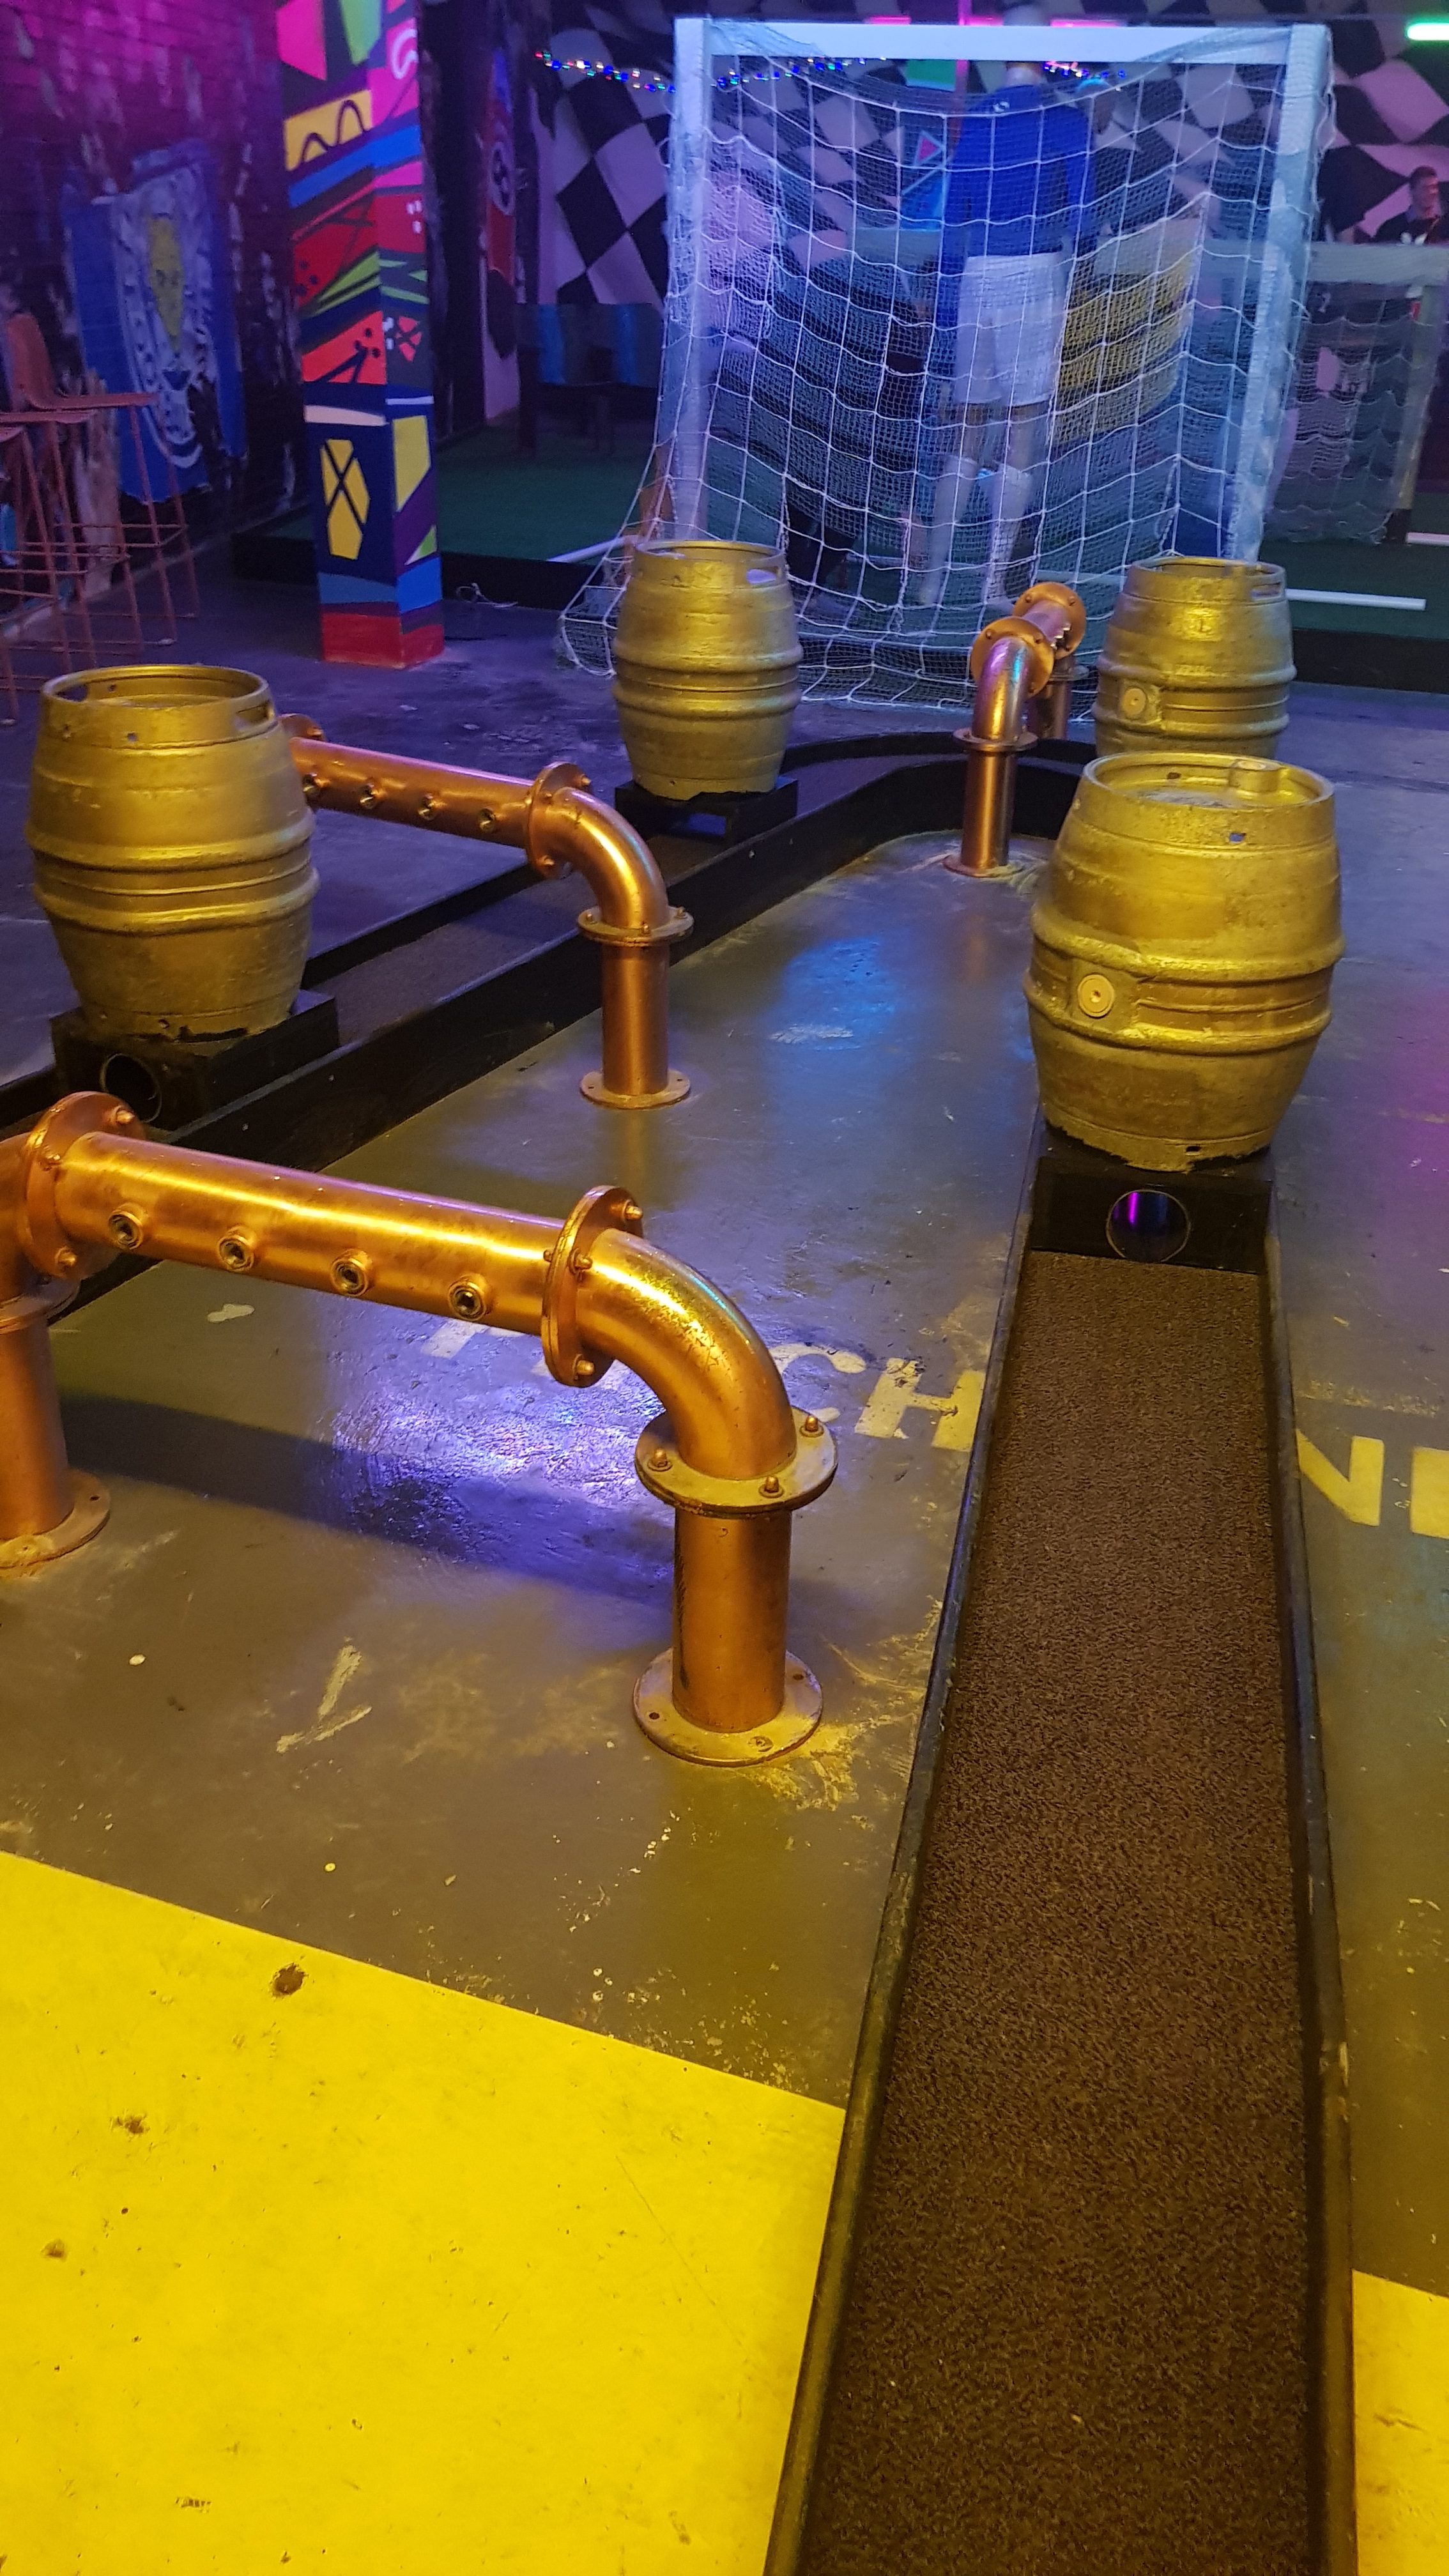 One of the mini golf holes at Caddyshackers. Beer kegs and copper piping make obstacles for the ball to go through 